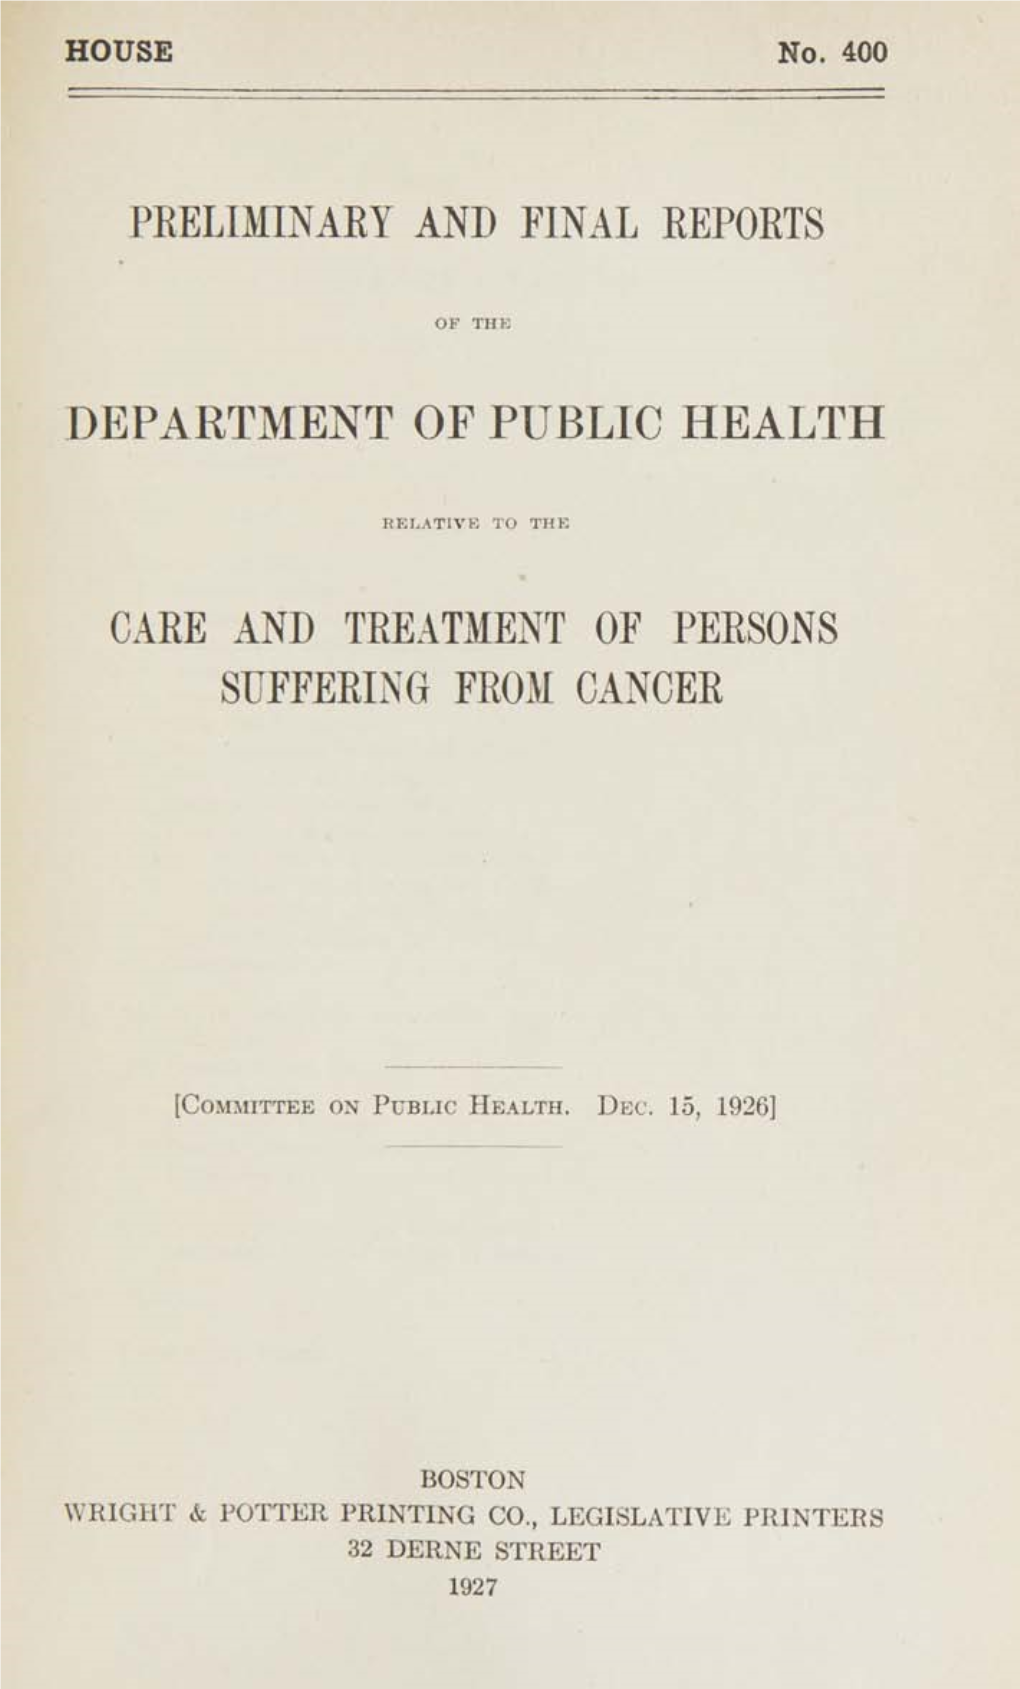 Preliminary and Final Reports Department of Public Health Care and Treatment of Persons Suffering from Cancer